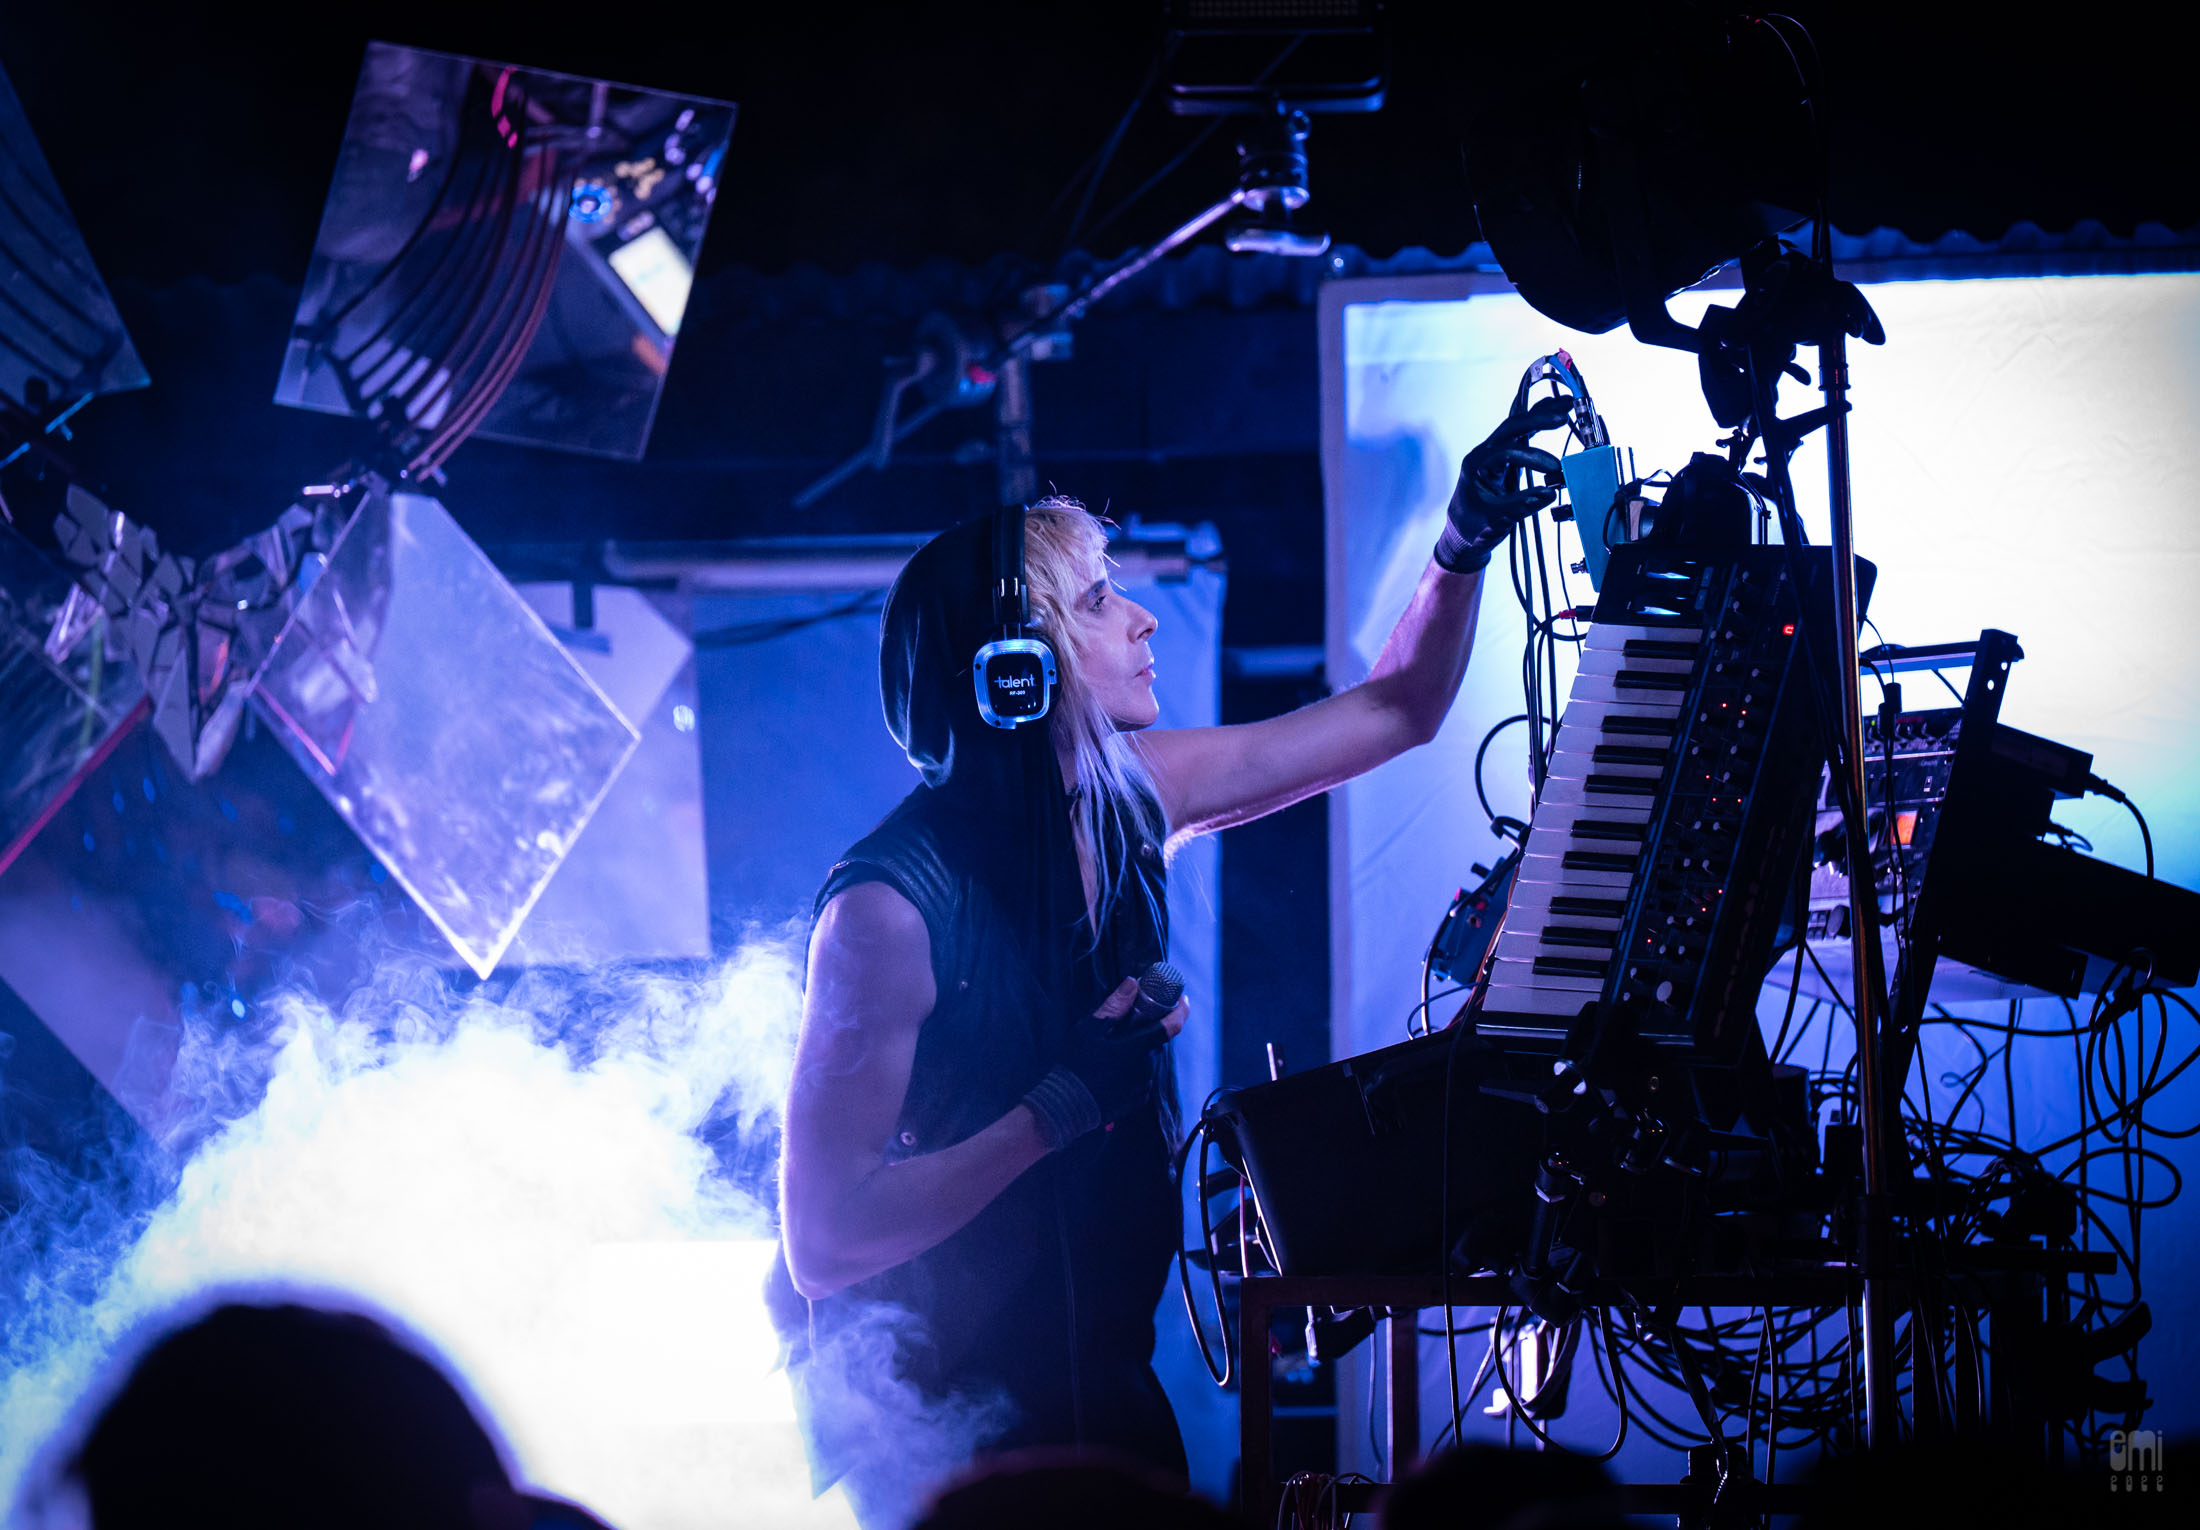 2022.5.4 IAMX Machinate Tour at The Chapels Outdoor, SF, CA. photo by emi